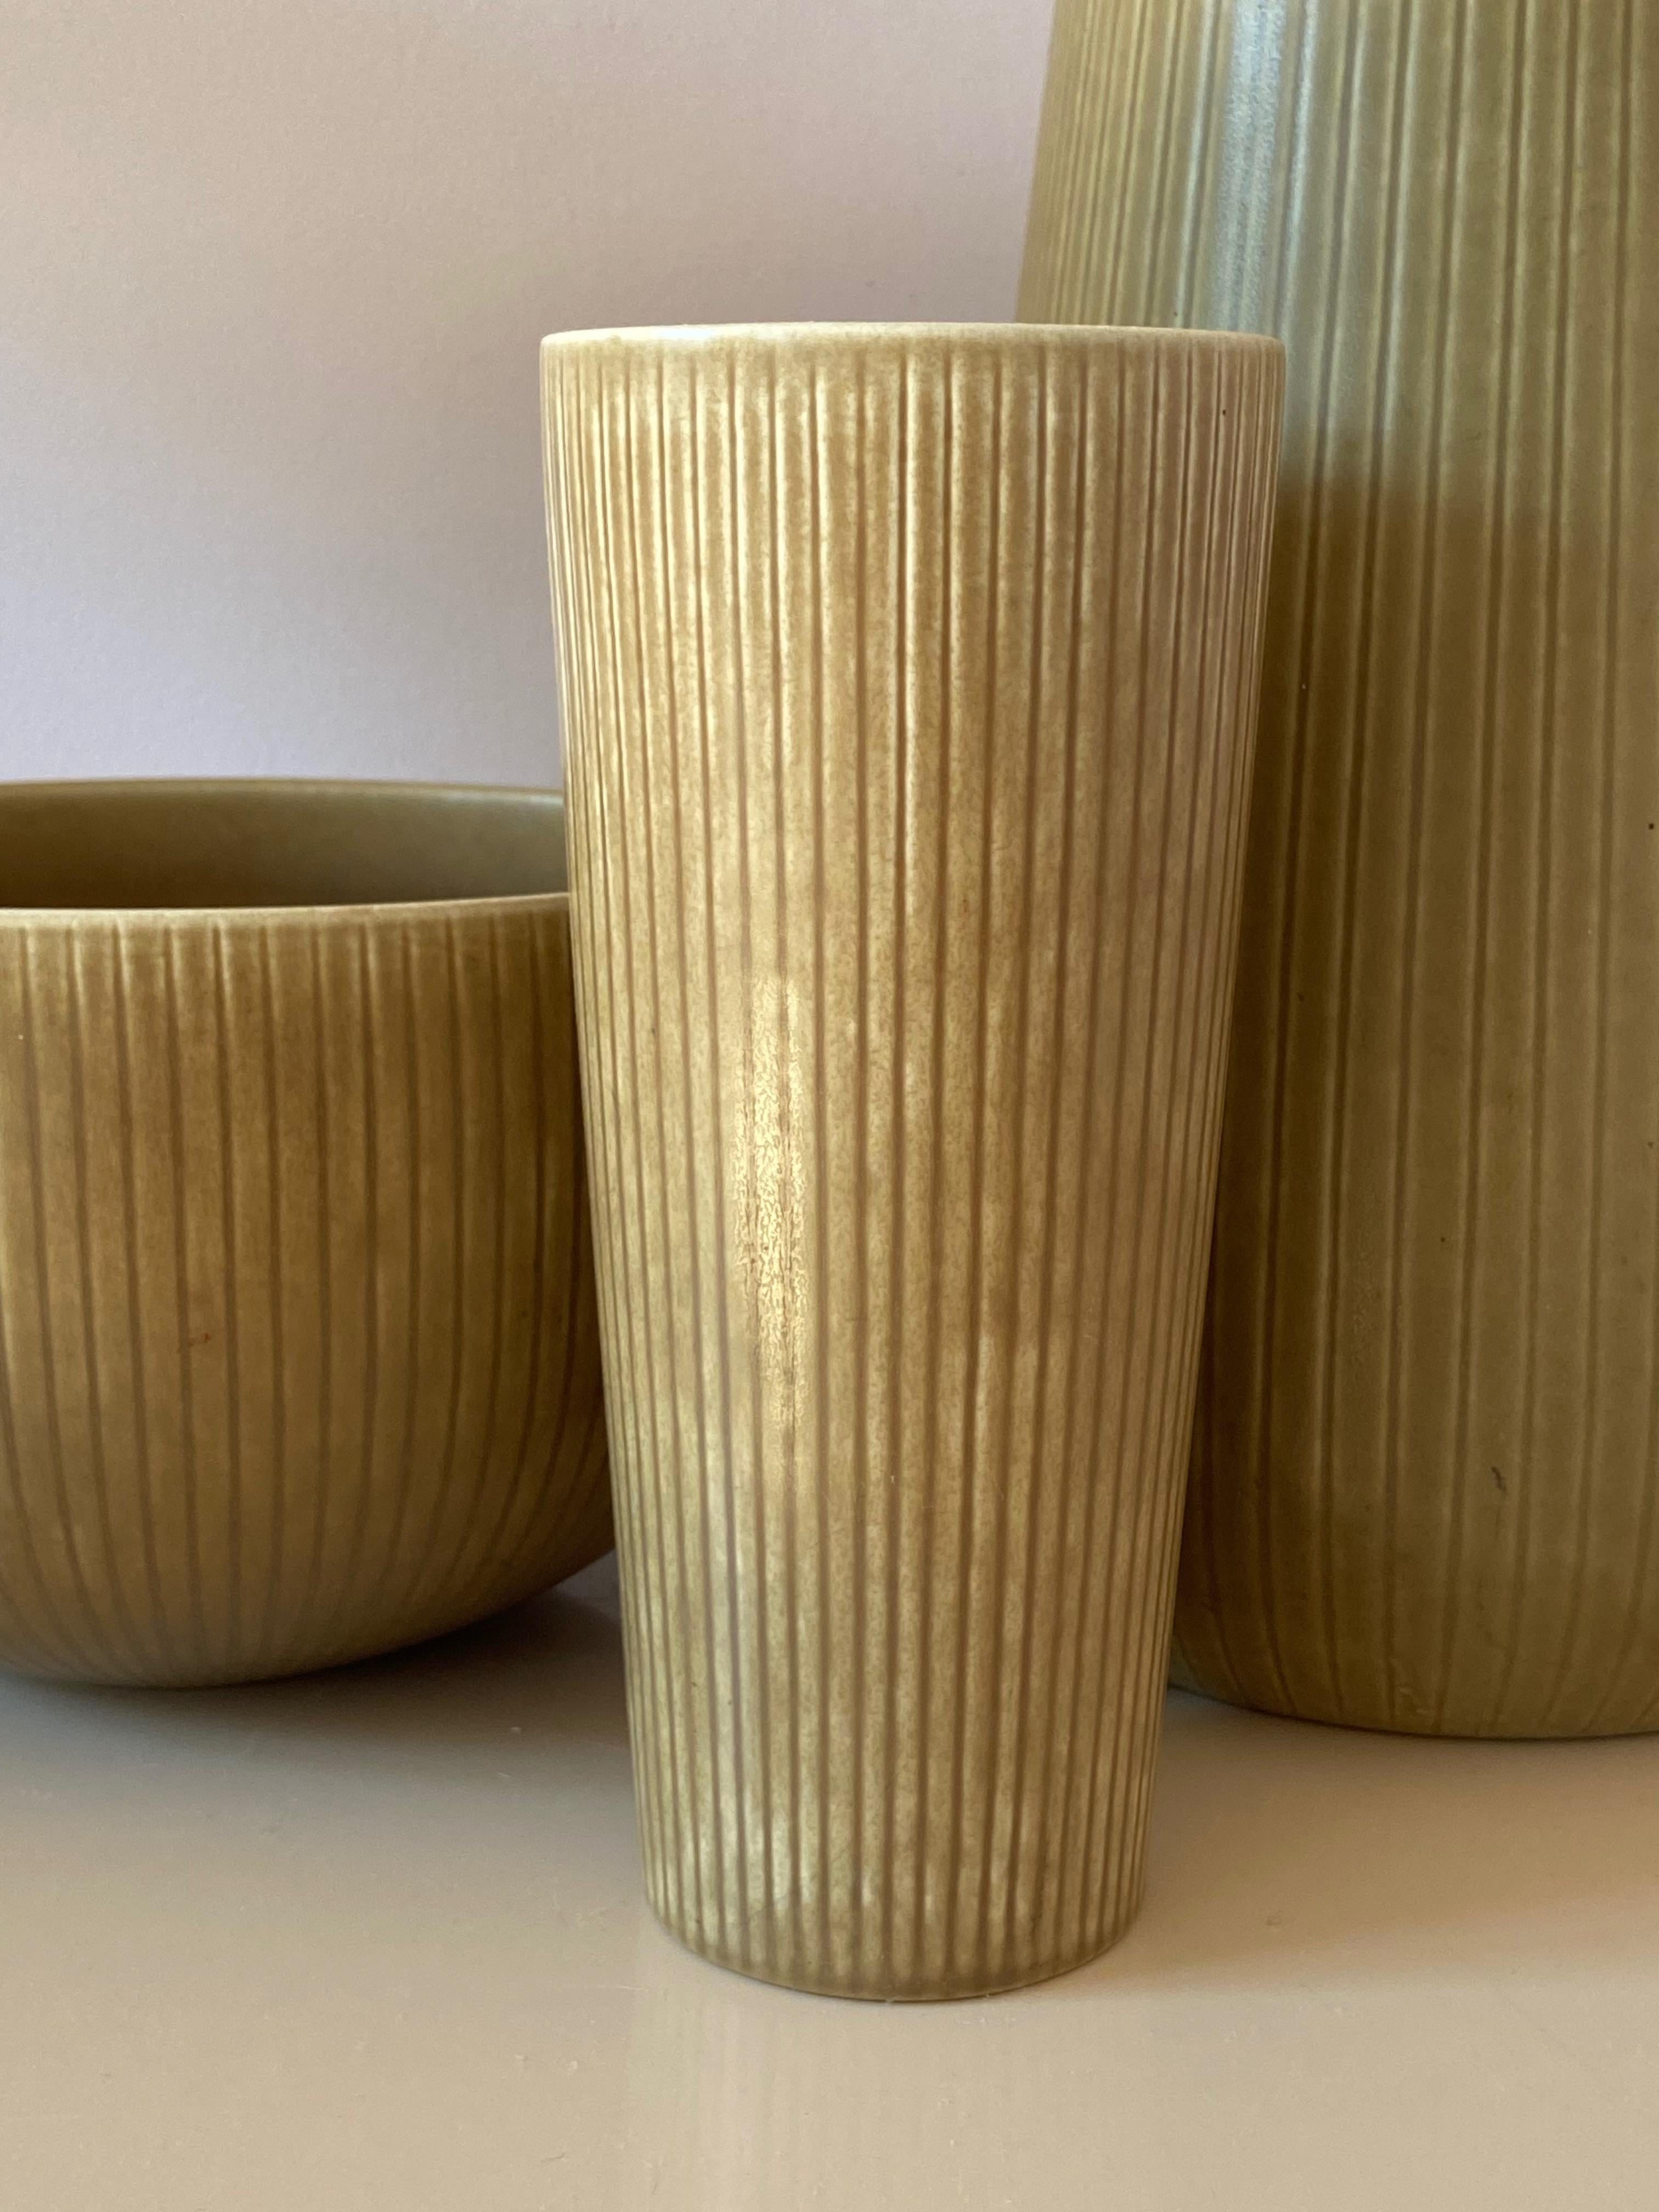 Set of 3 Rörstrand Ritzi Pottery Vases and Bowl by Gunnar Nylund Sweden 1950s For Sale 2